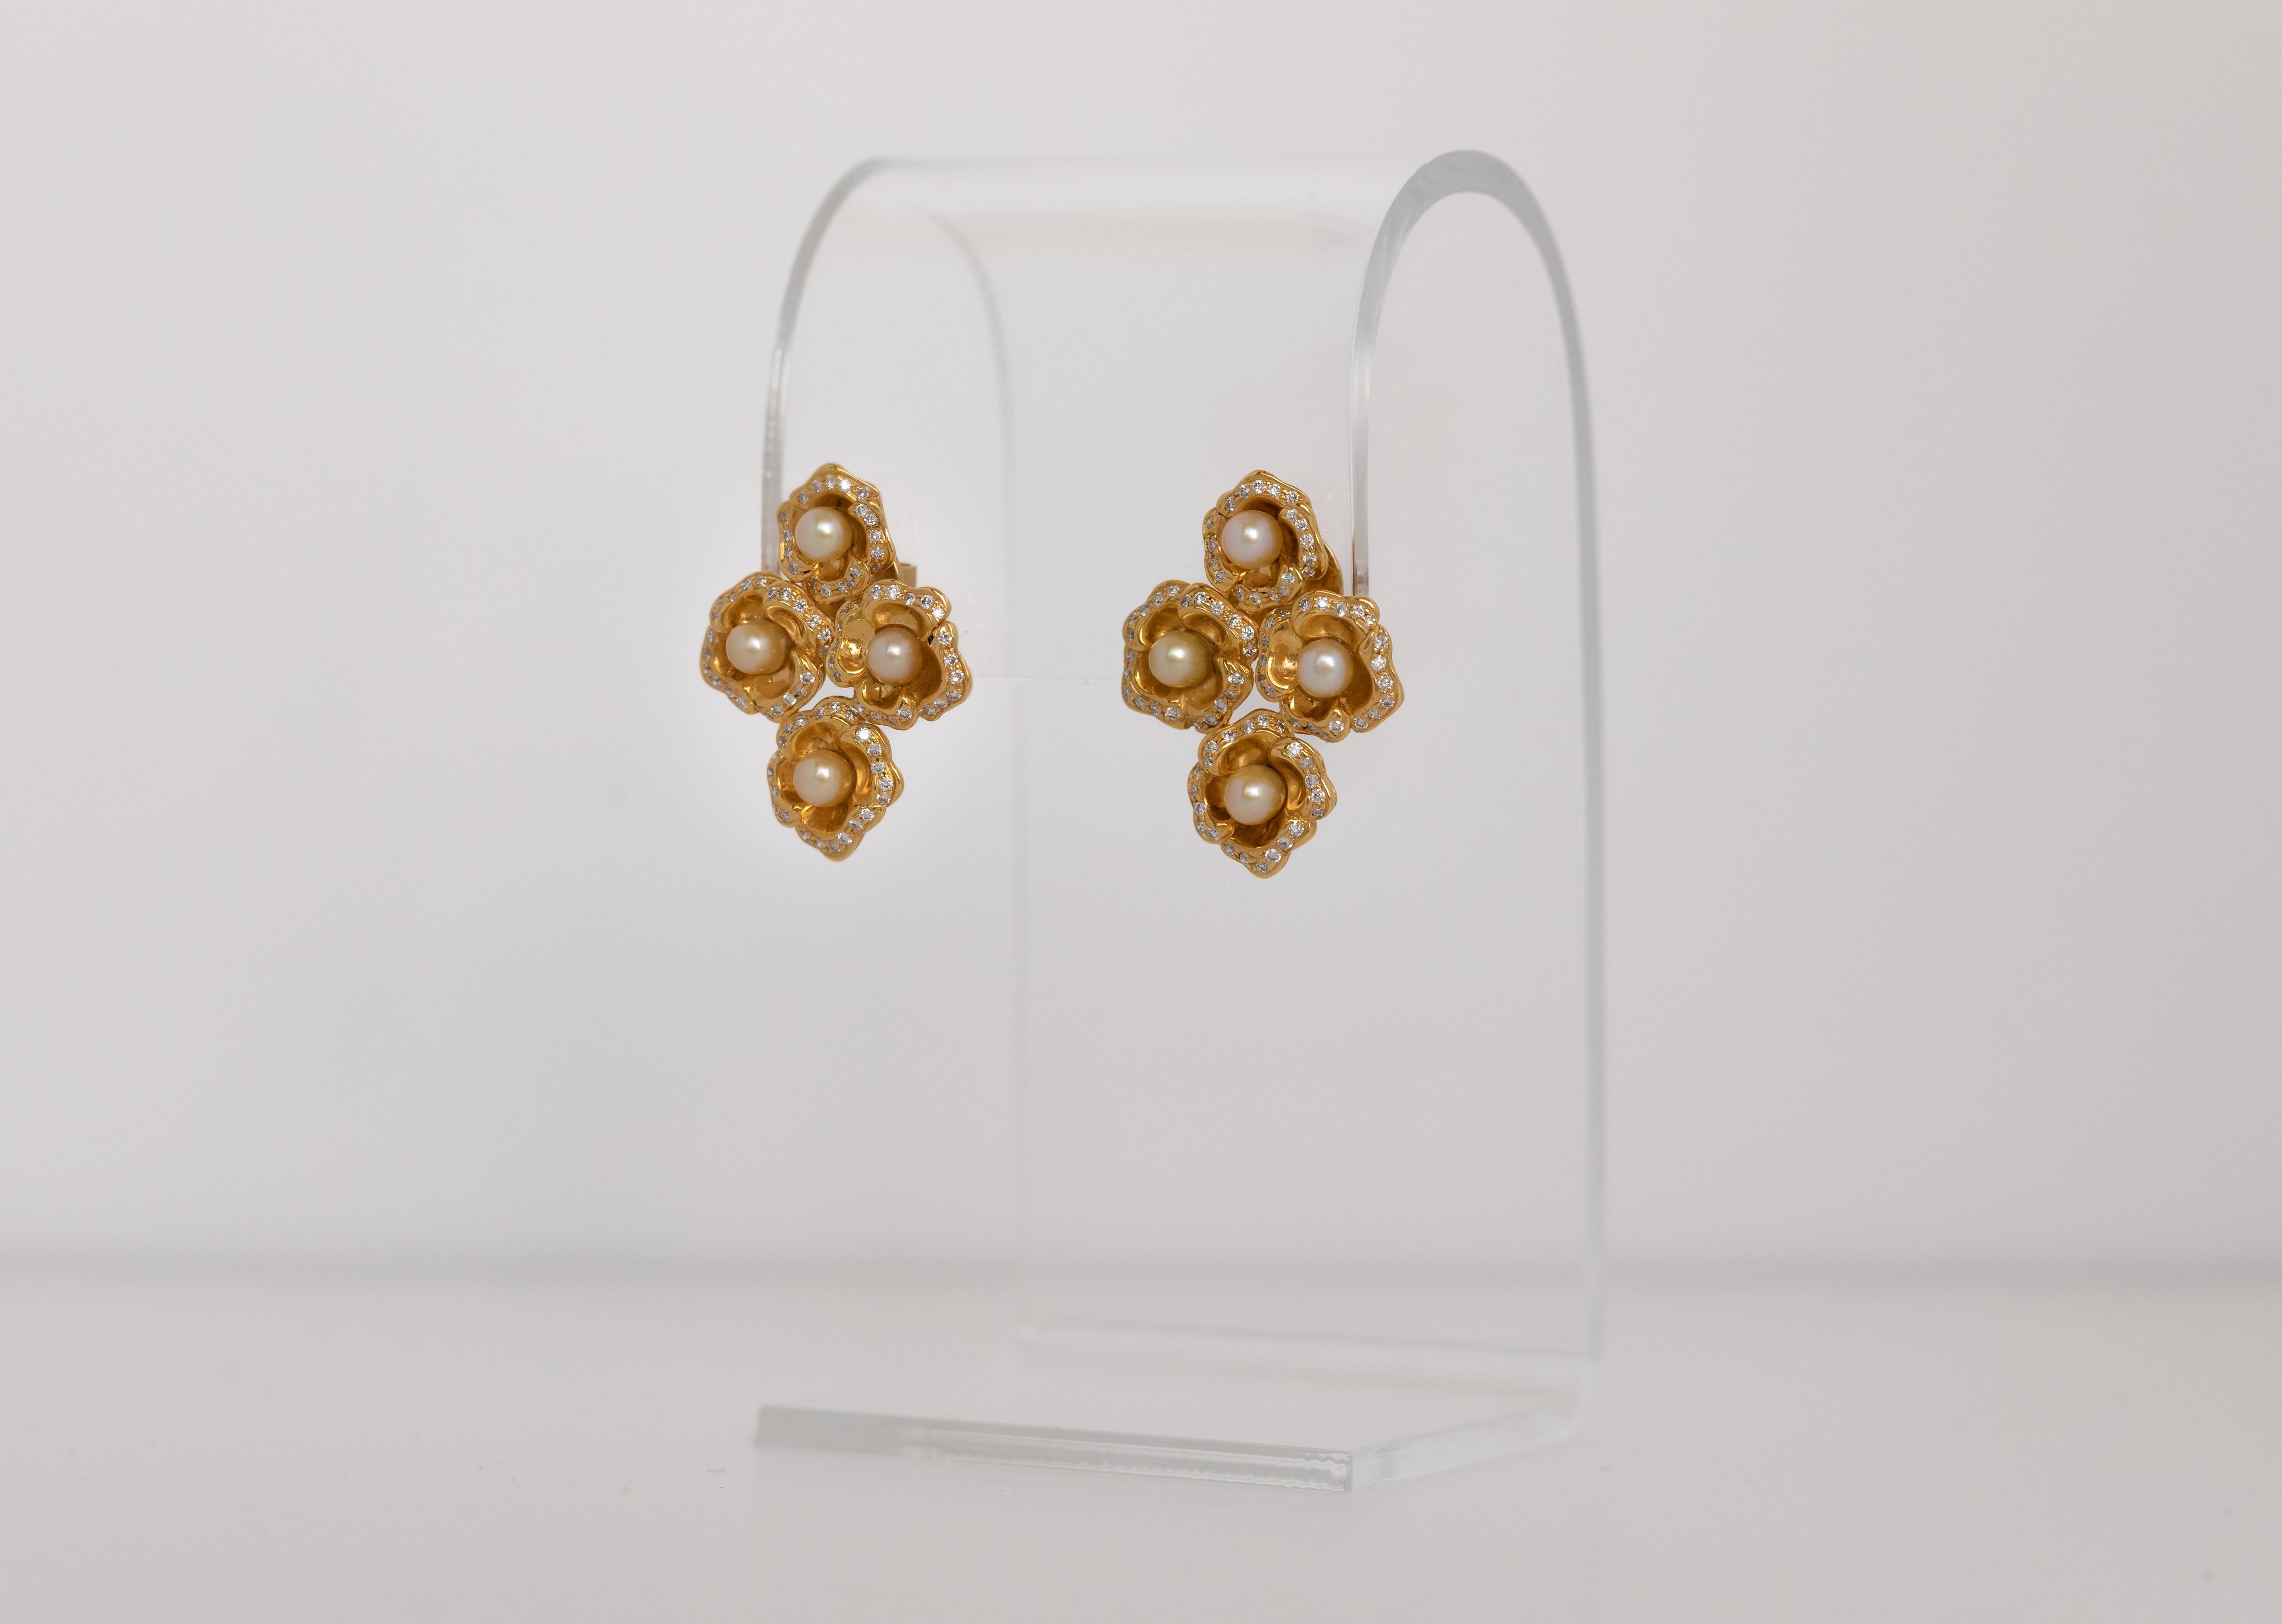 Intricately crafted 18 karat yellow gold flowers centered with certified natural Bahraini pearls with diamond studded rims.

Unique and one a kind earrings designed and manufactured in Bahrain.

Gold weight : 13g
Pearls: 5 ct.
Round Diamonds: 0.10